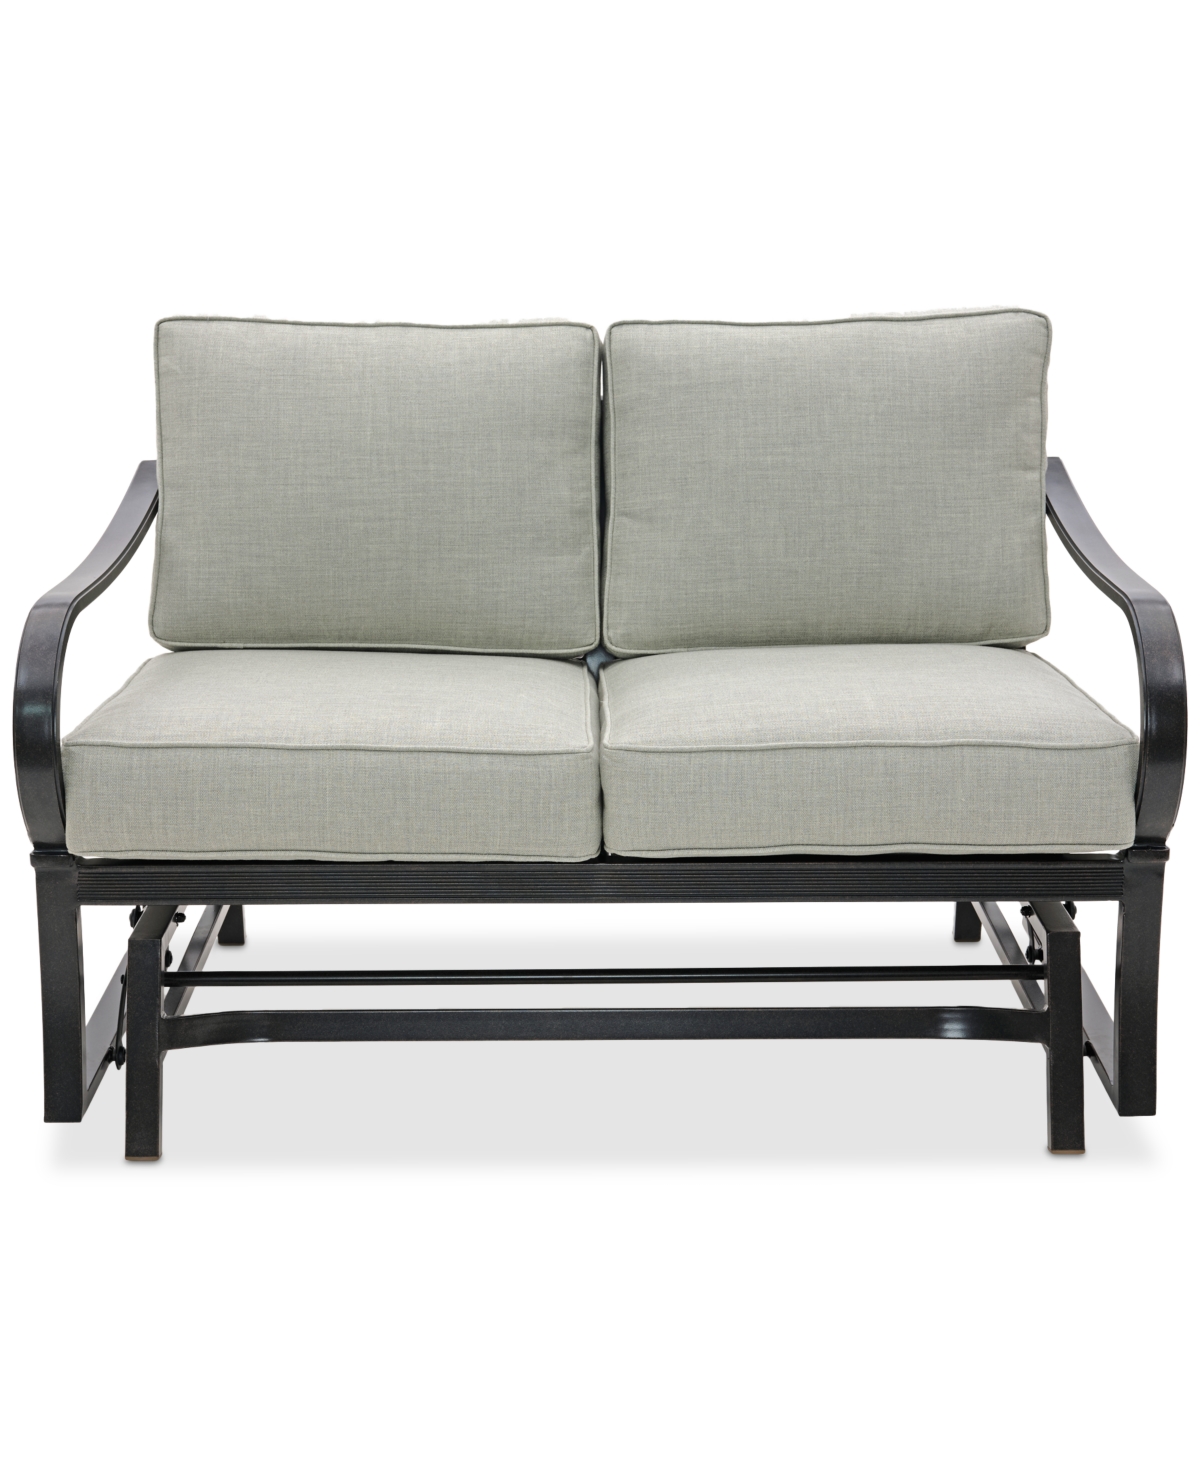 Agio St Croix Outdoor Loveseat Glider In Oyster Light Grey